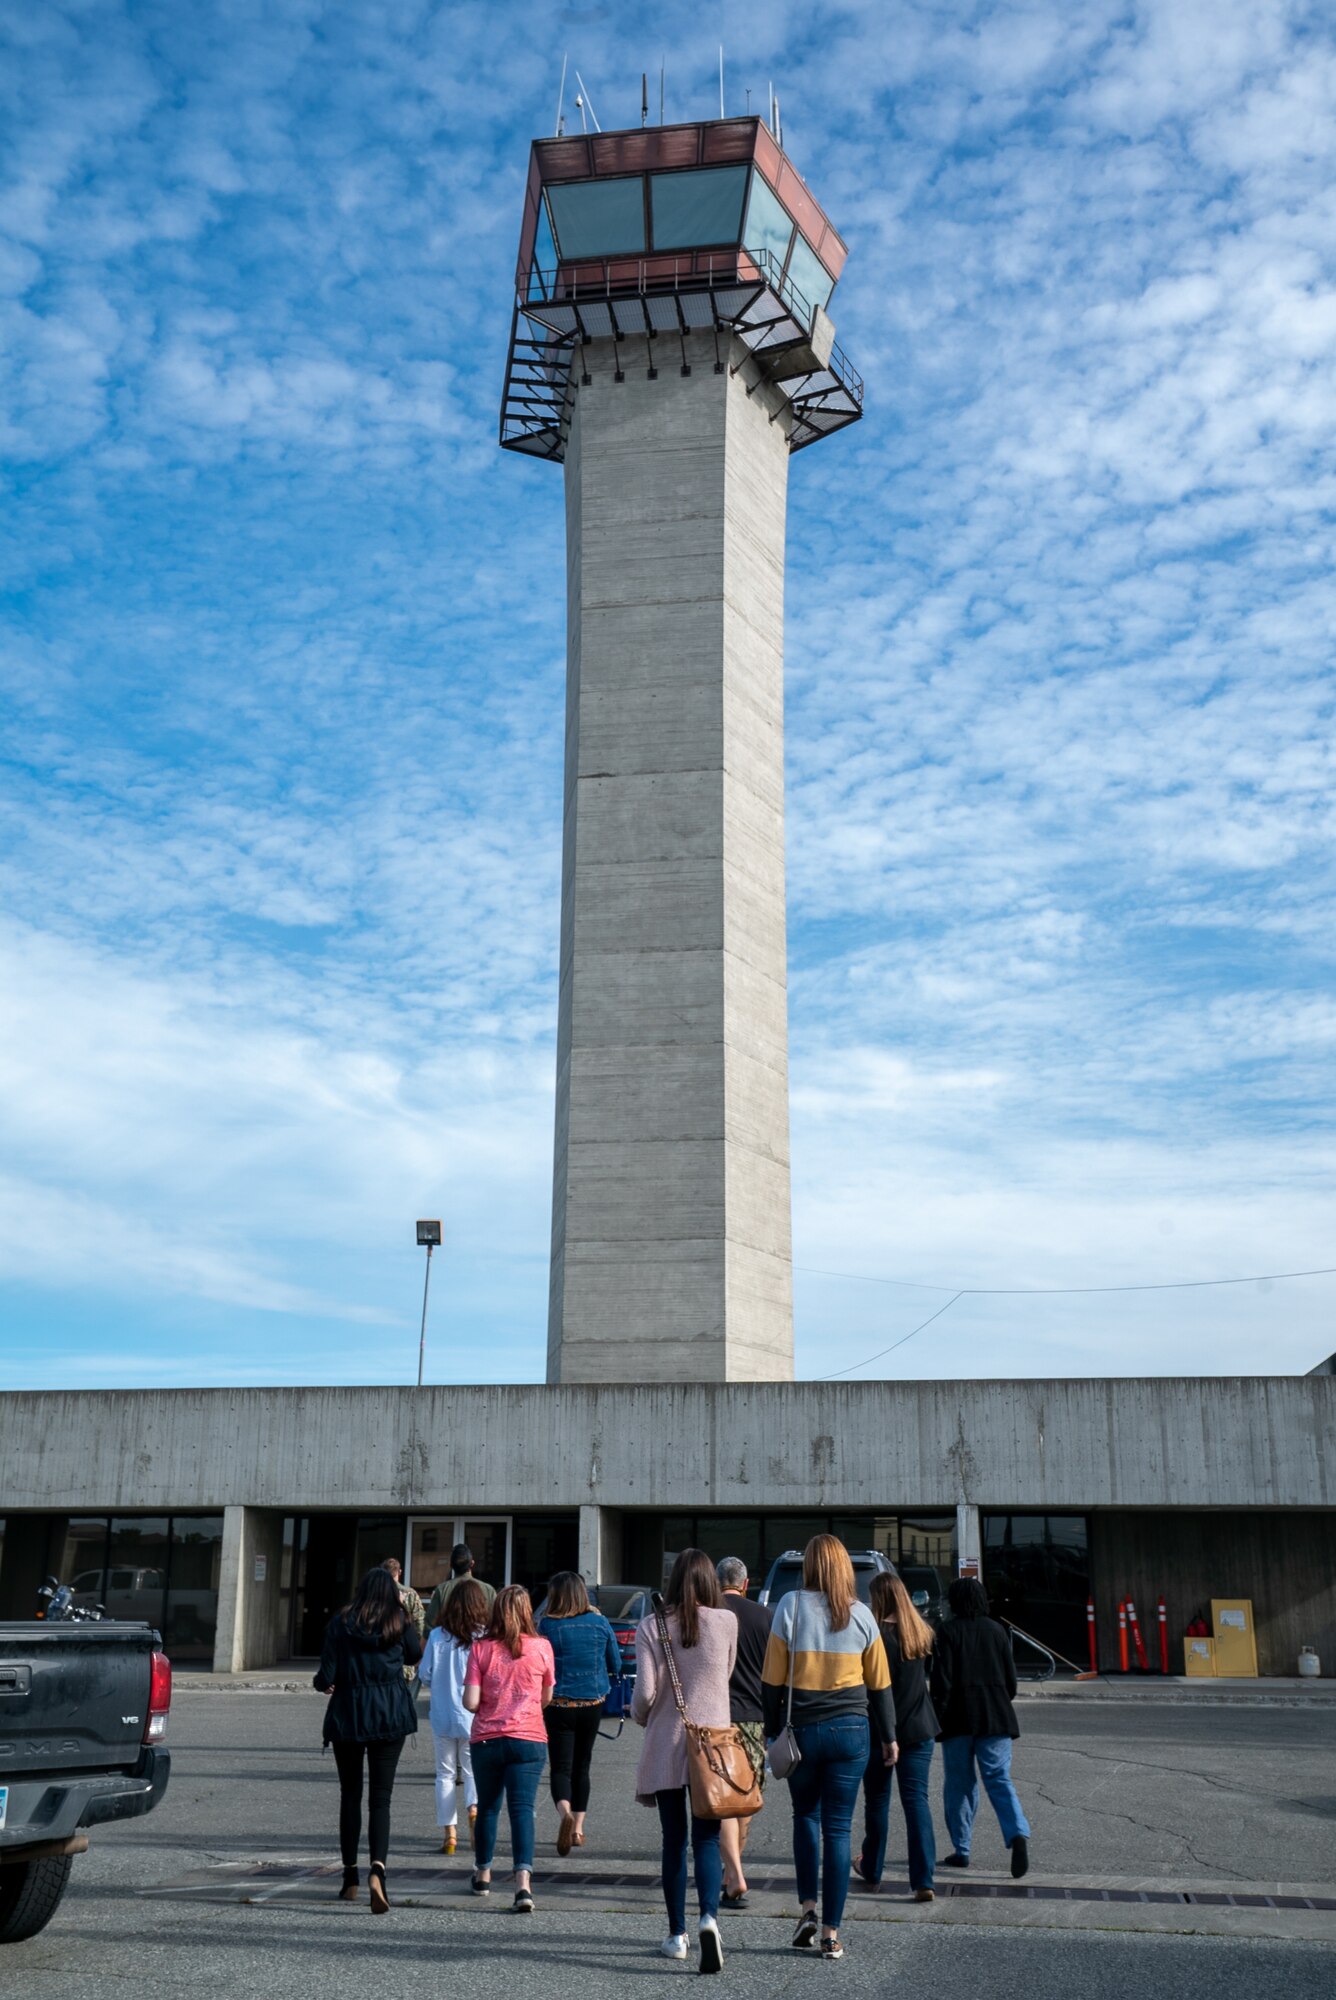 Spouses from the 3rd Wing approach the Air Traffic Control tower during an immersion tour at Joint Base Elmendorf-Richardson, Alaska.